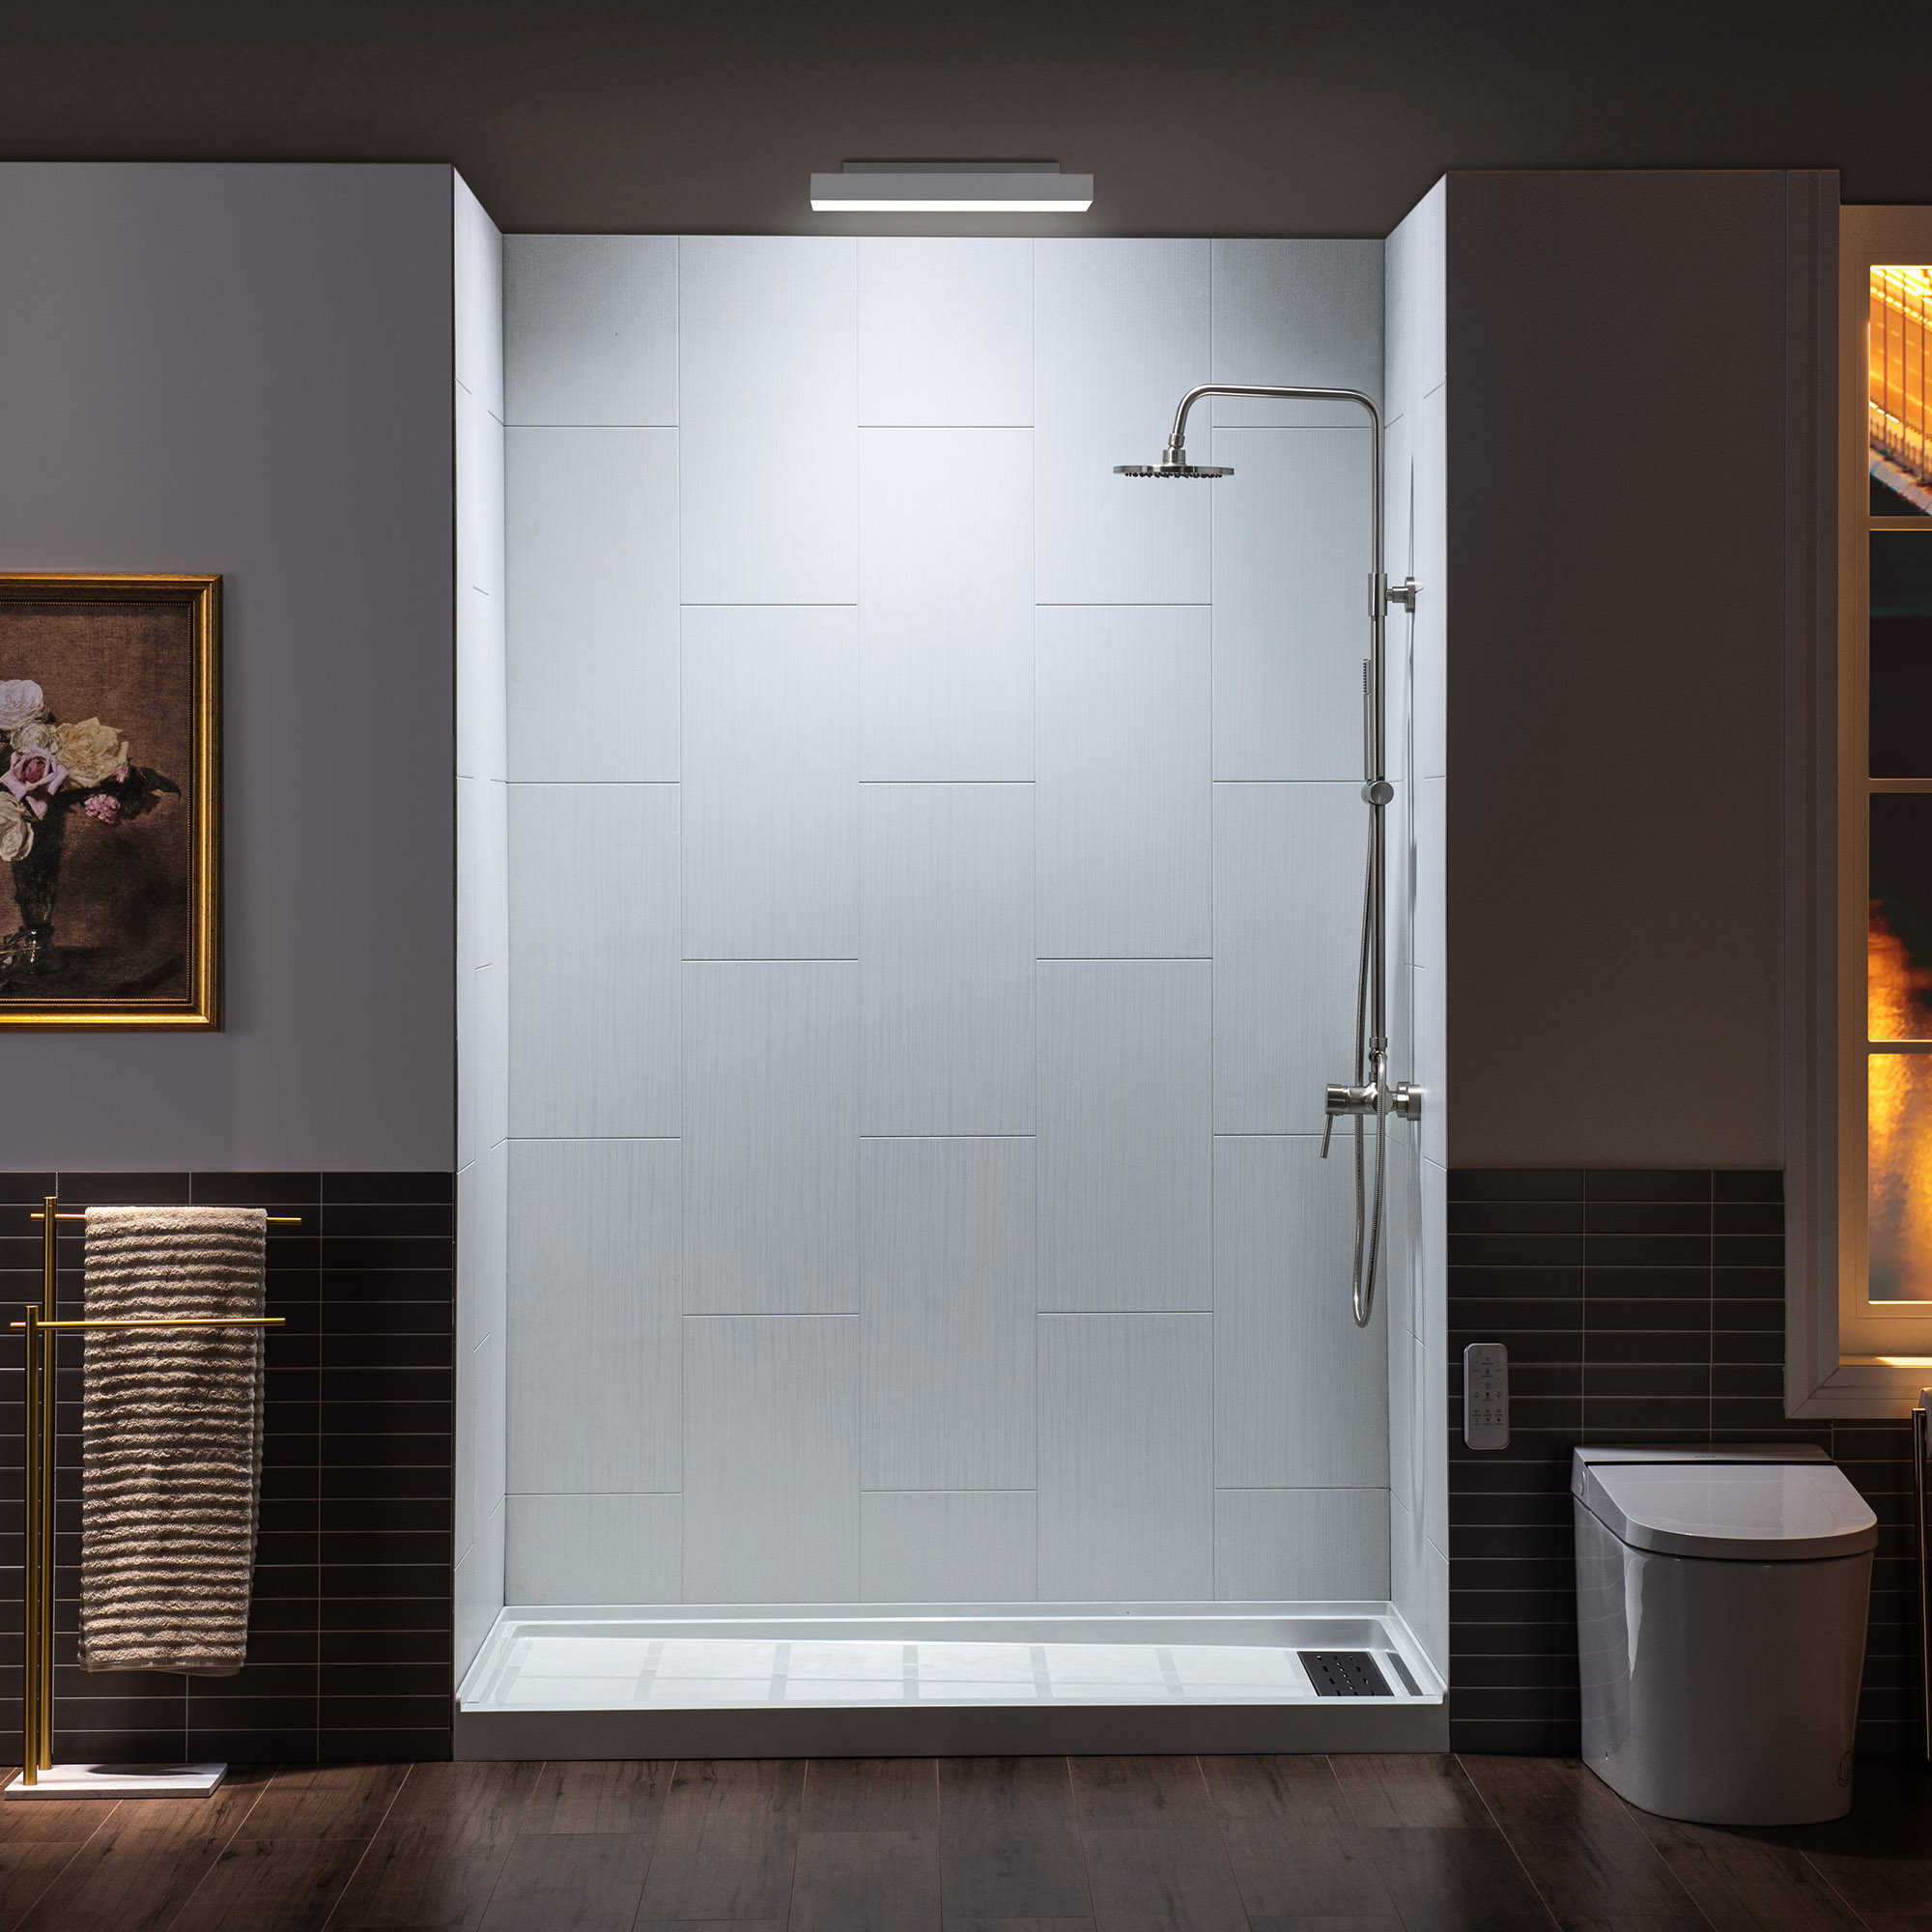  WOODBRIDGE Solid Surface 3-Panel Shower Wall Kit, 36-in L x 60-in W x 75-in H, Stacked Block in a Staggered Vertical Pattern. Matte White Finish_11744